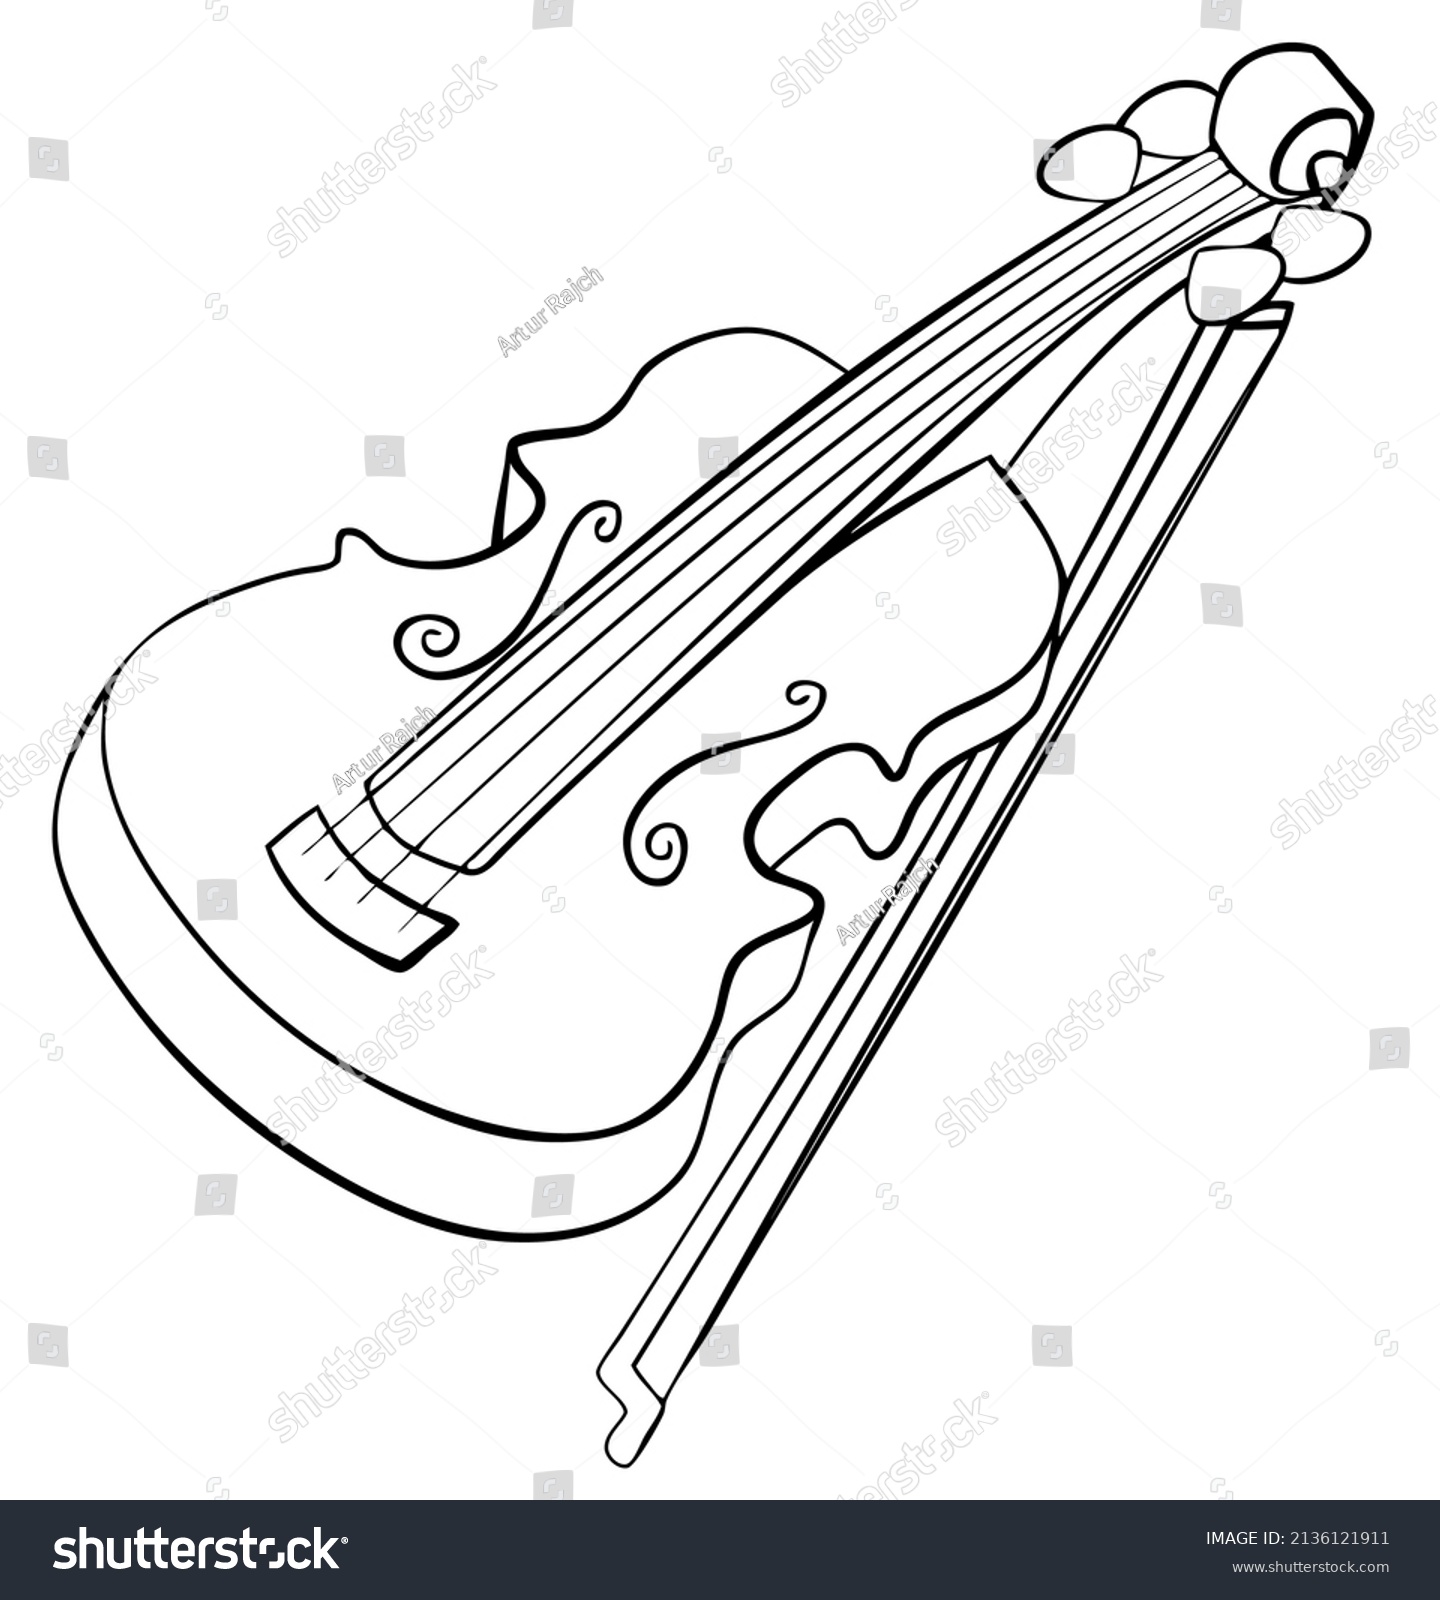 Violin coloring page images stock photos d objects vectors